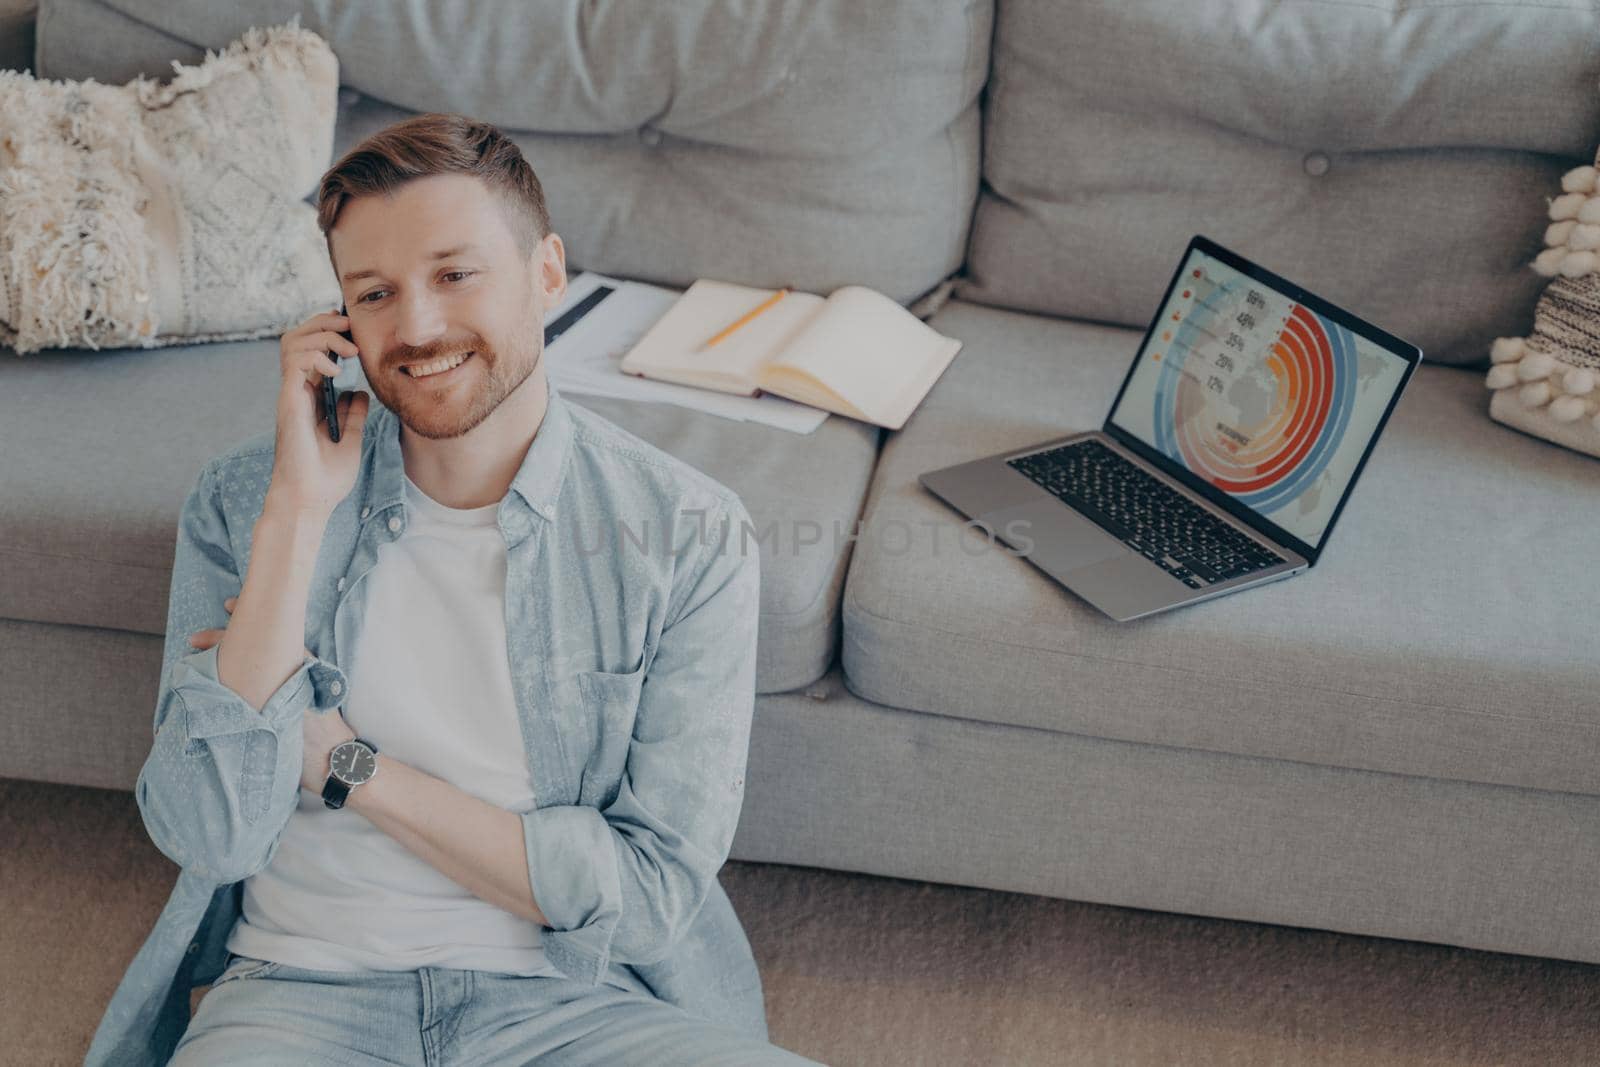 Happy young man calling family to inform about receiving promotion at his company after submitting successful project idea, sitting on floor while resting against couch with open laptop showing graphs